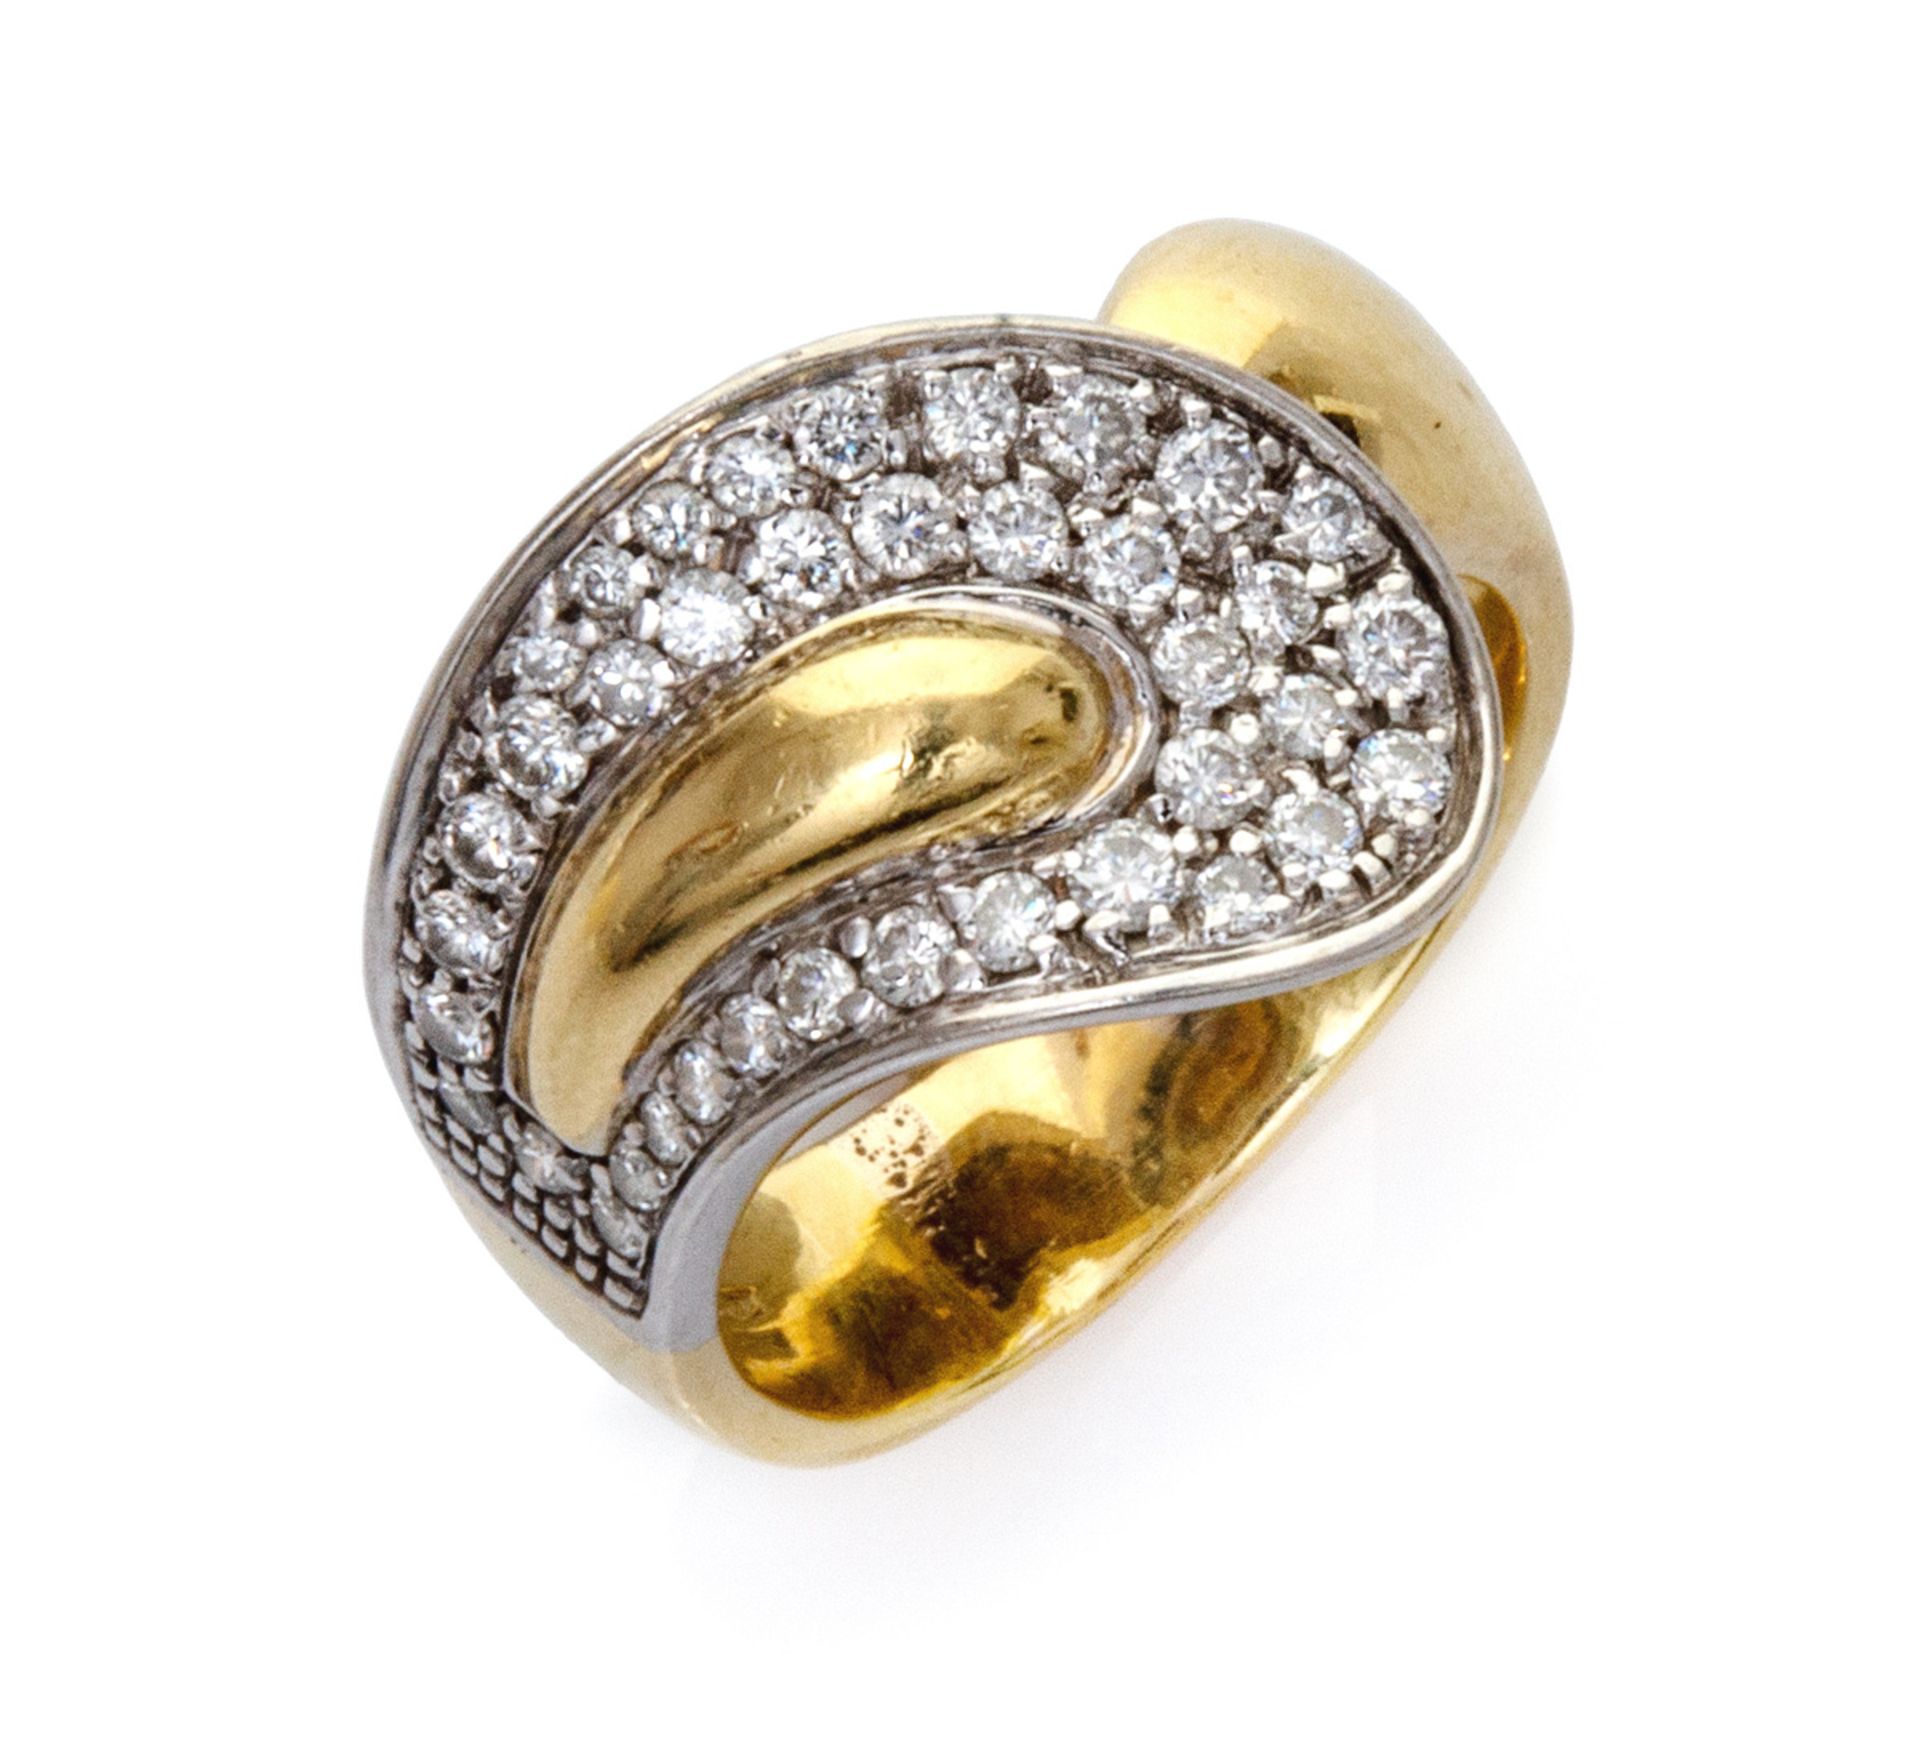 DAMIANI RING in yellow gold 18 kts., moved body studded with diamonds. Diamonds ct. 1,10 ca, total